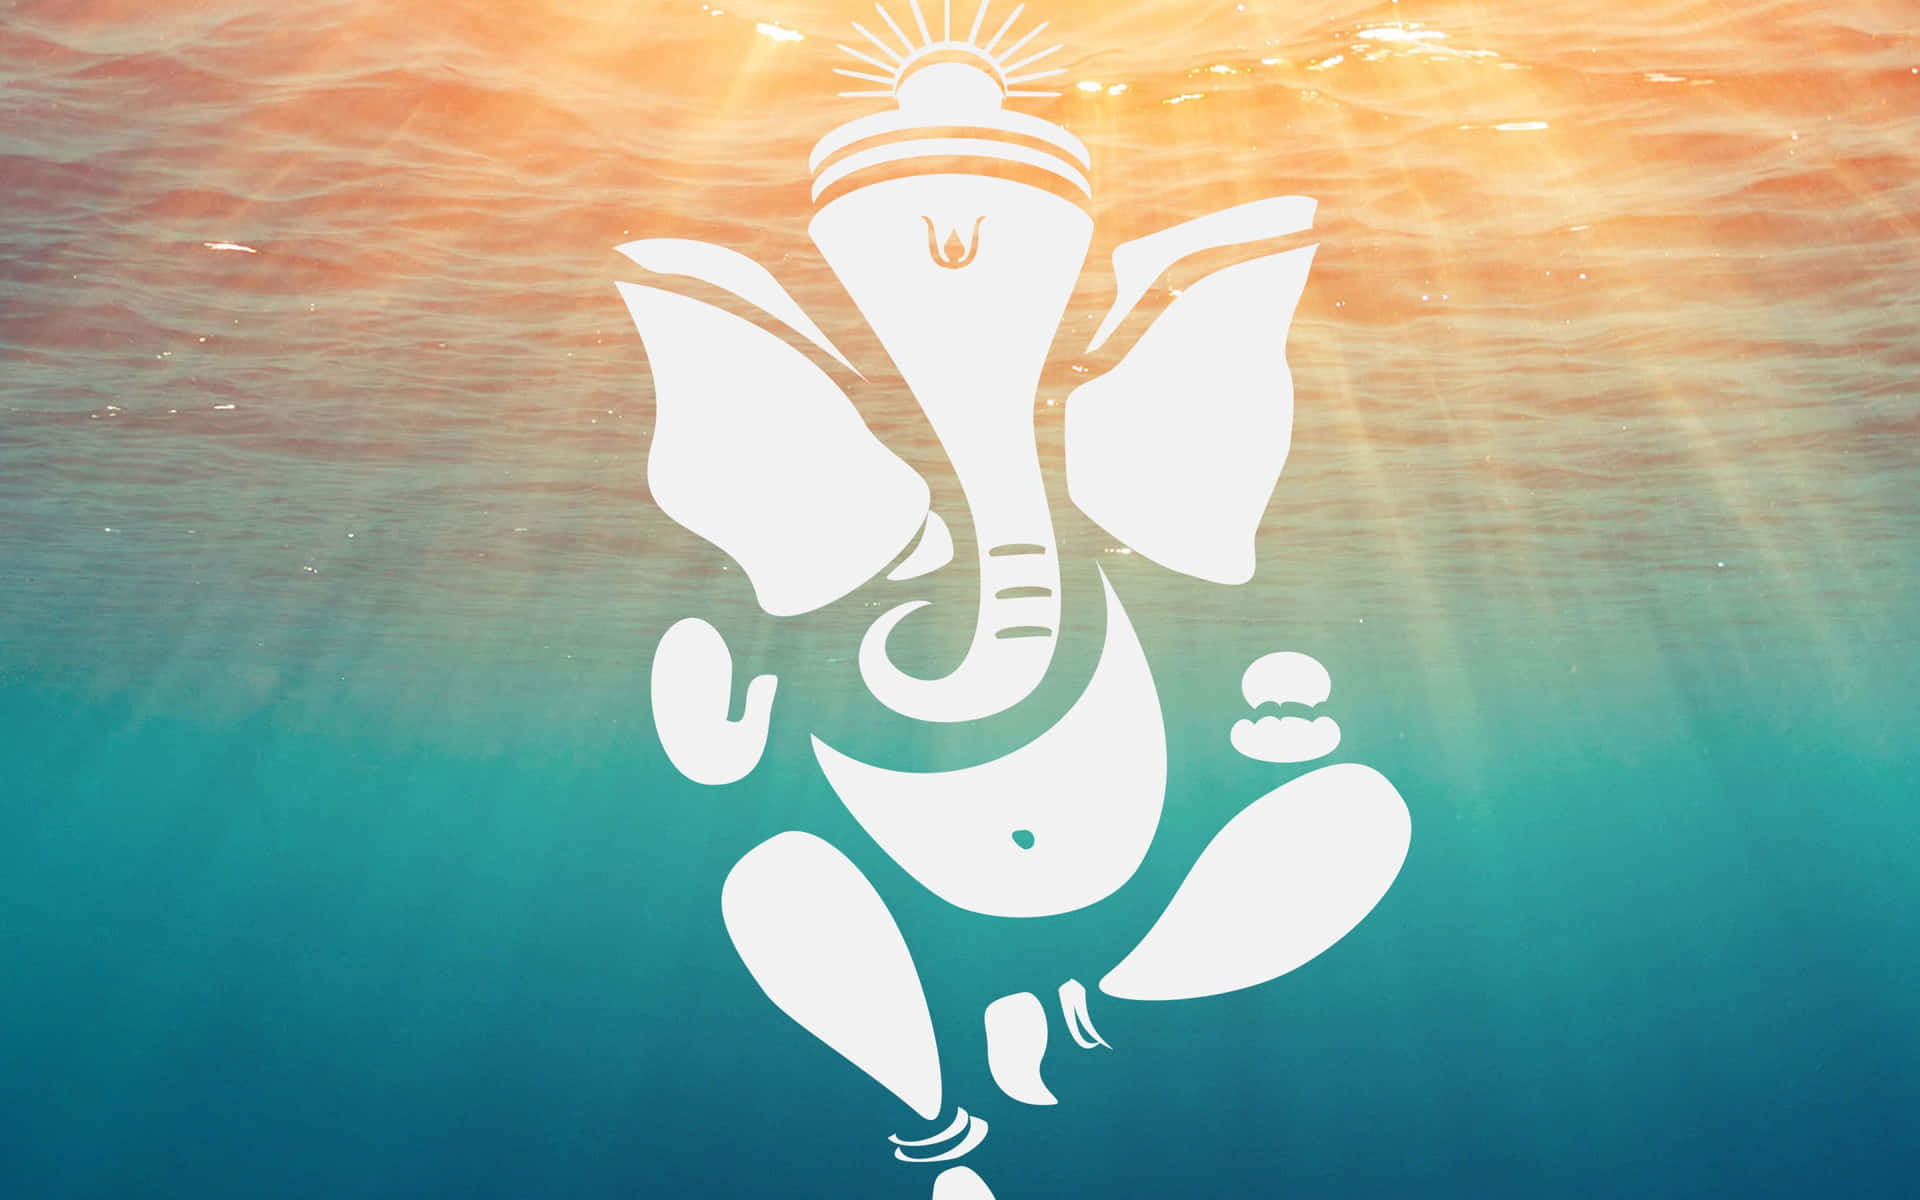 Lord Ganesha, The Remover of Obstacles